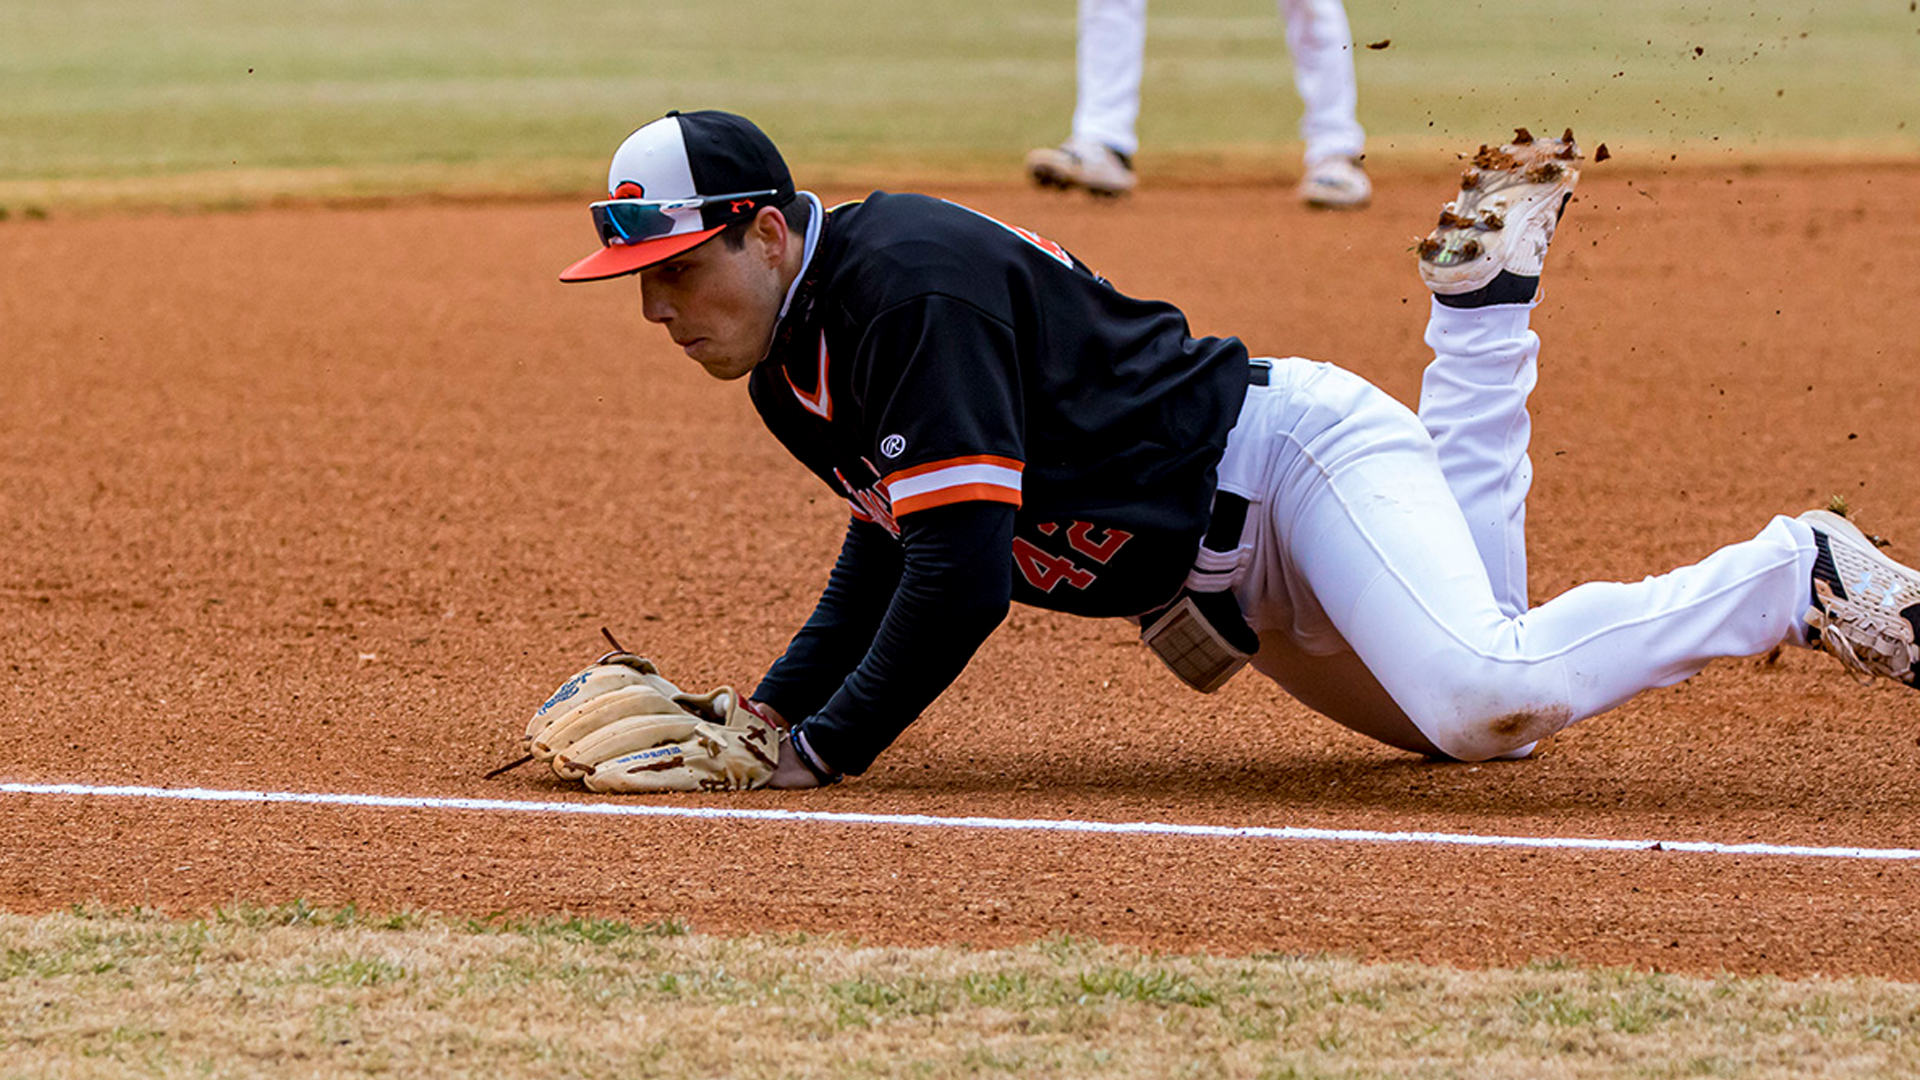 Pioneers drop second leg of Florida trip with 8-1 loss at Barry